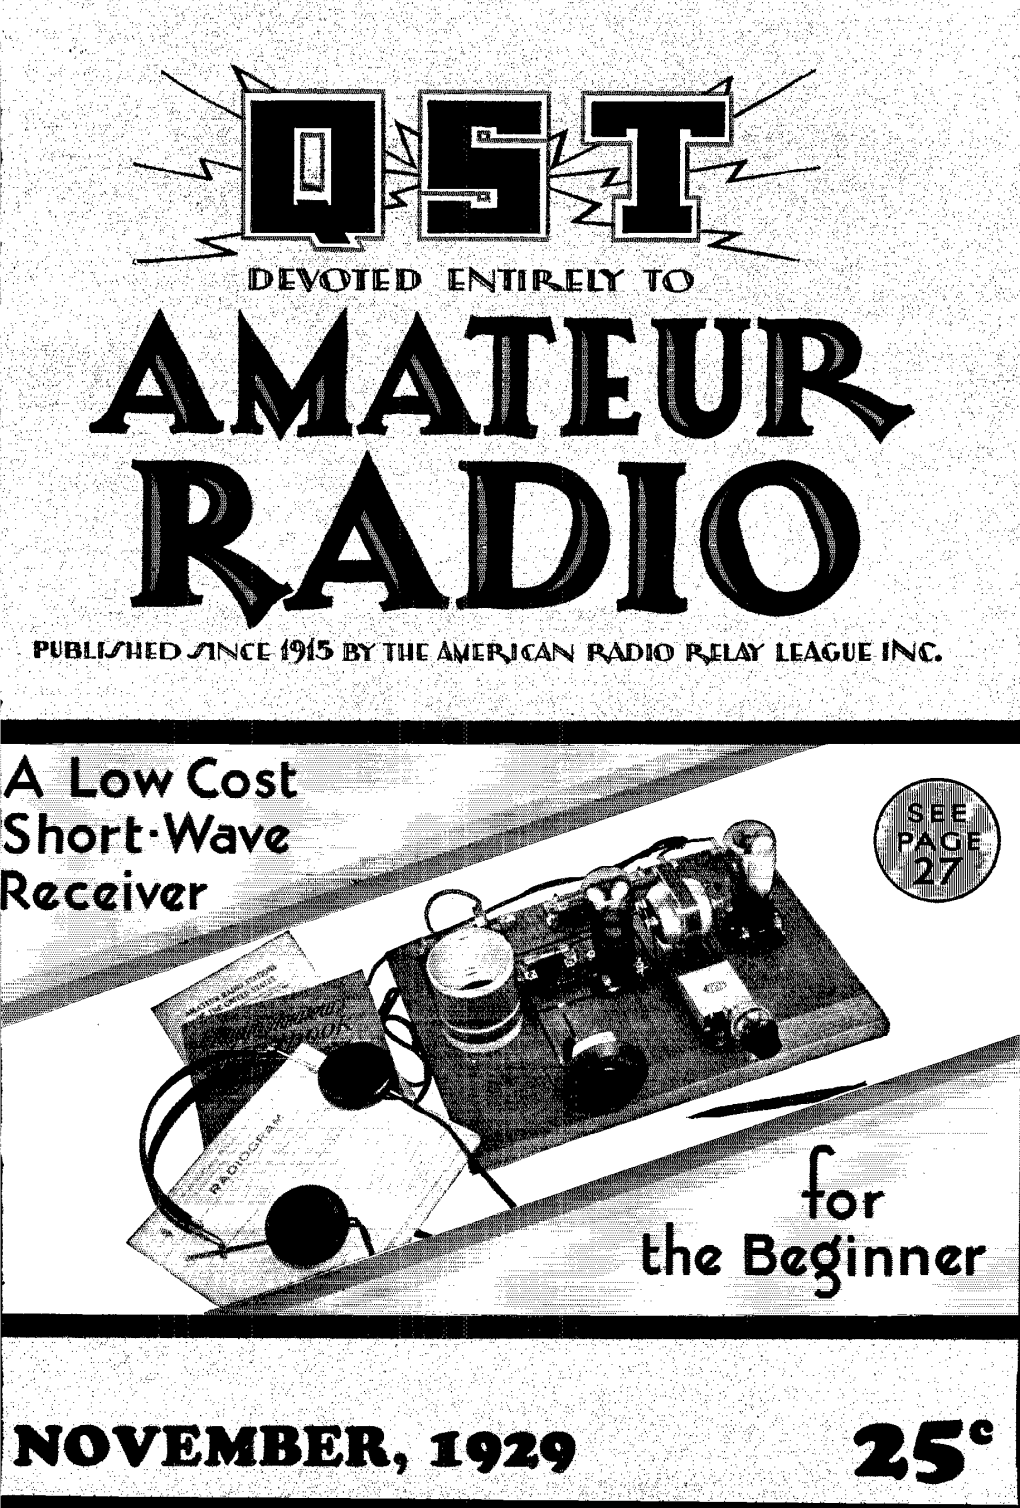 A Low Cost Short-Wave Receiver NOVEMBER 1929